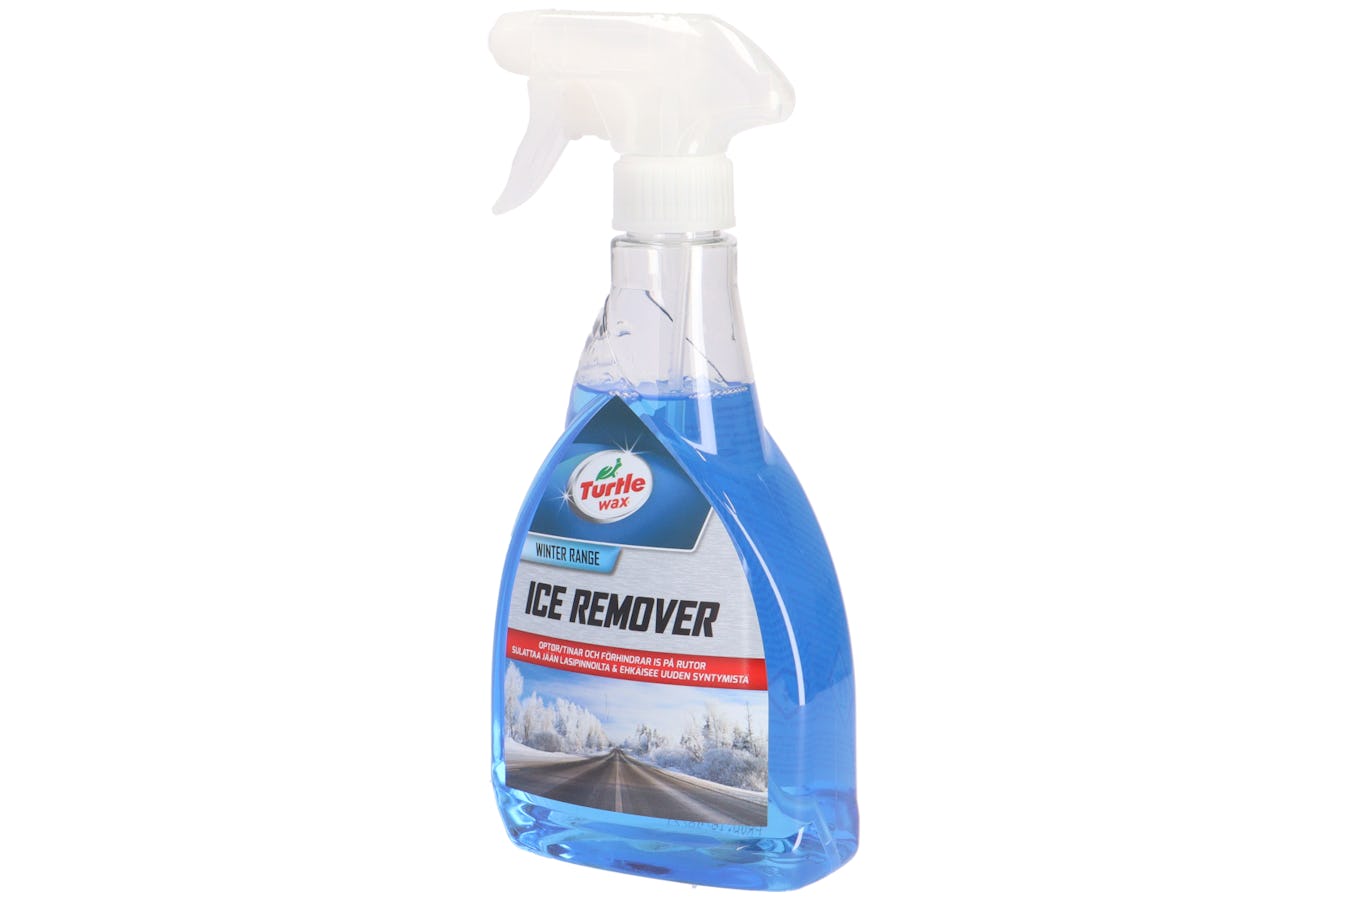 Ice remover